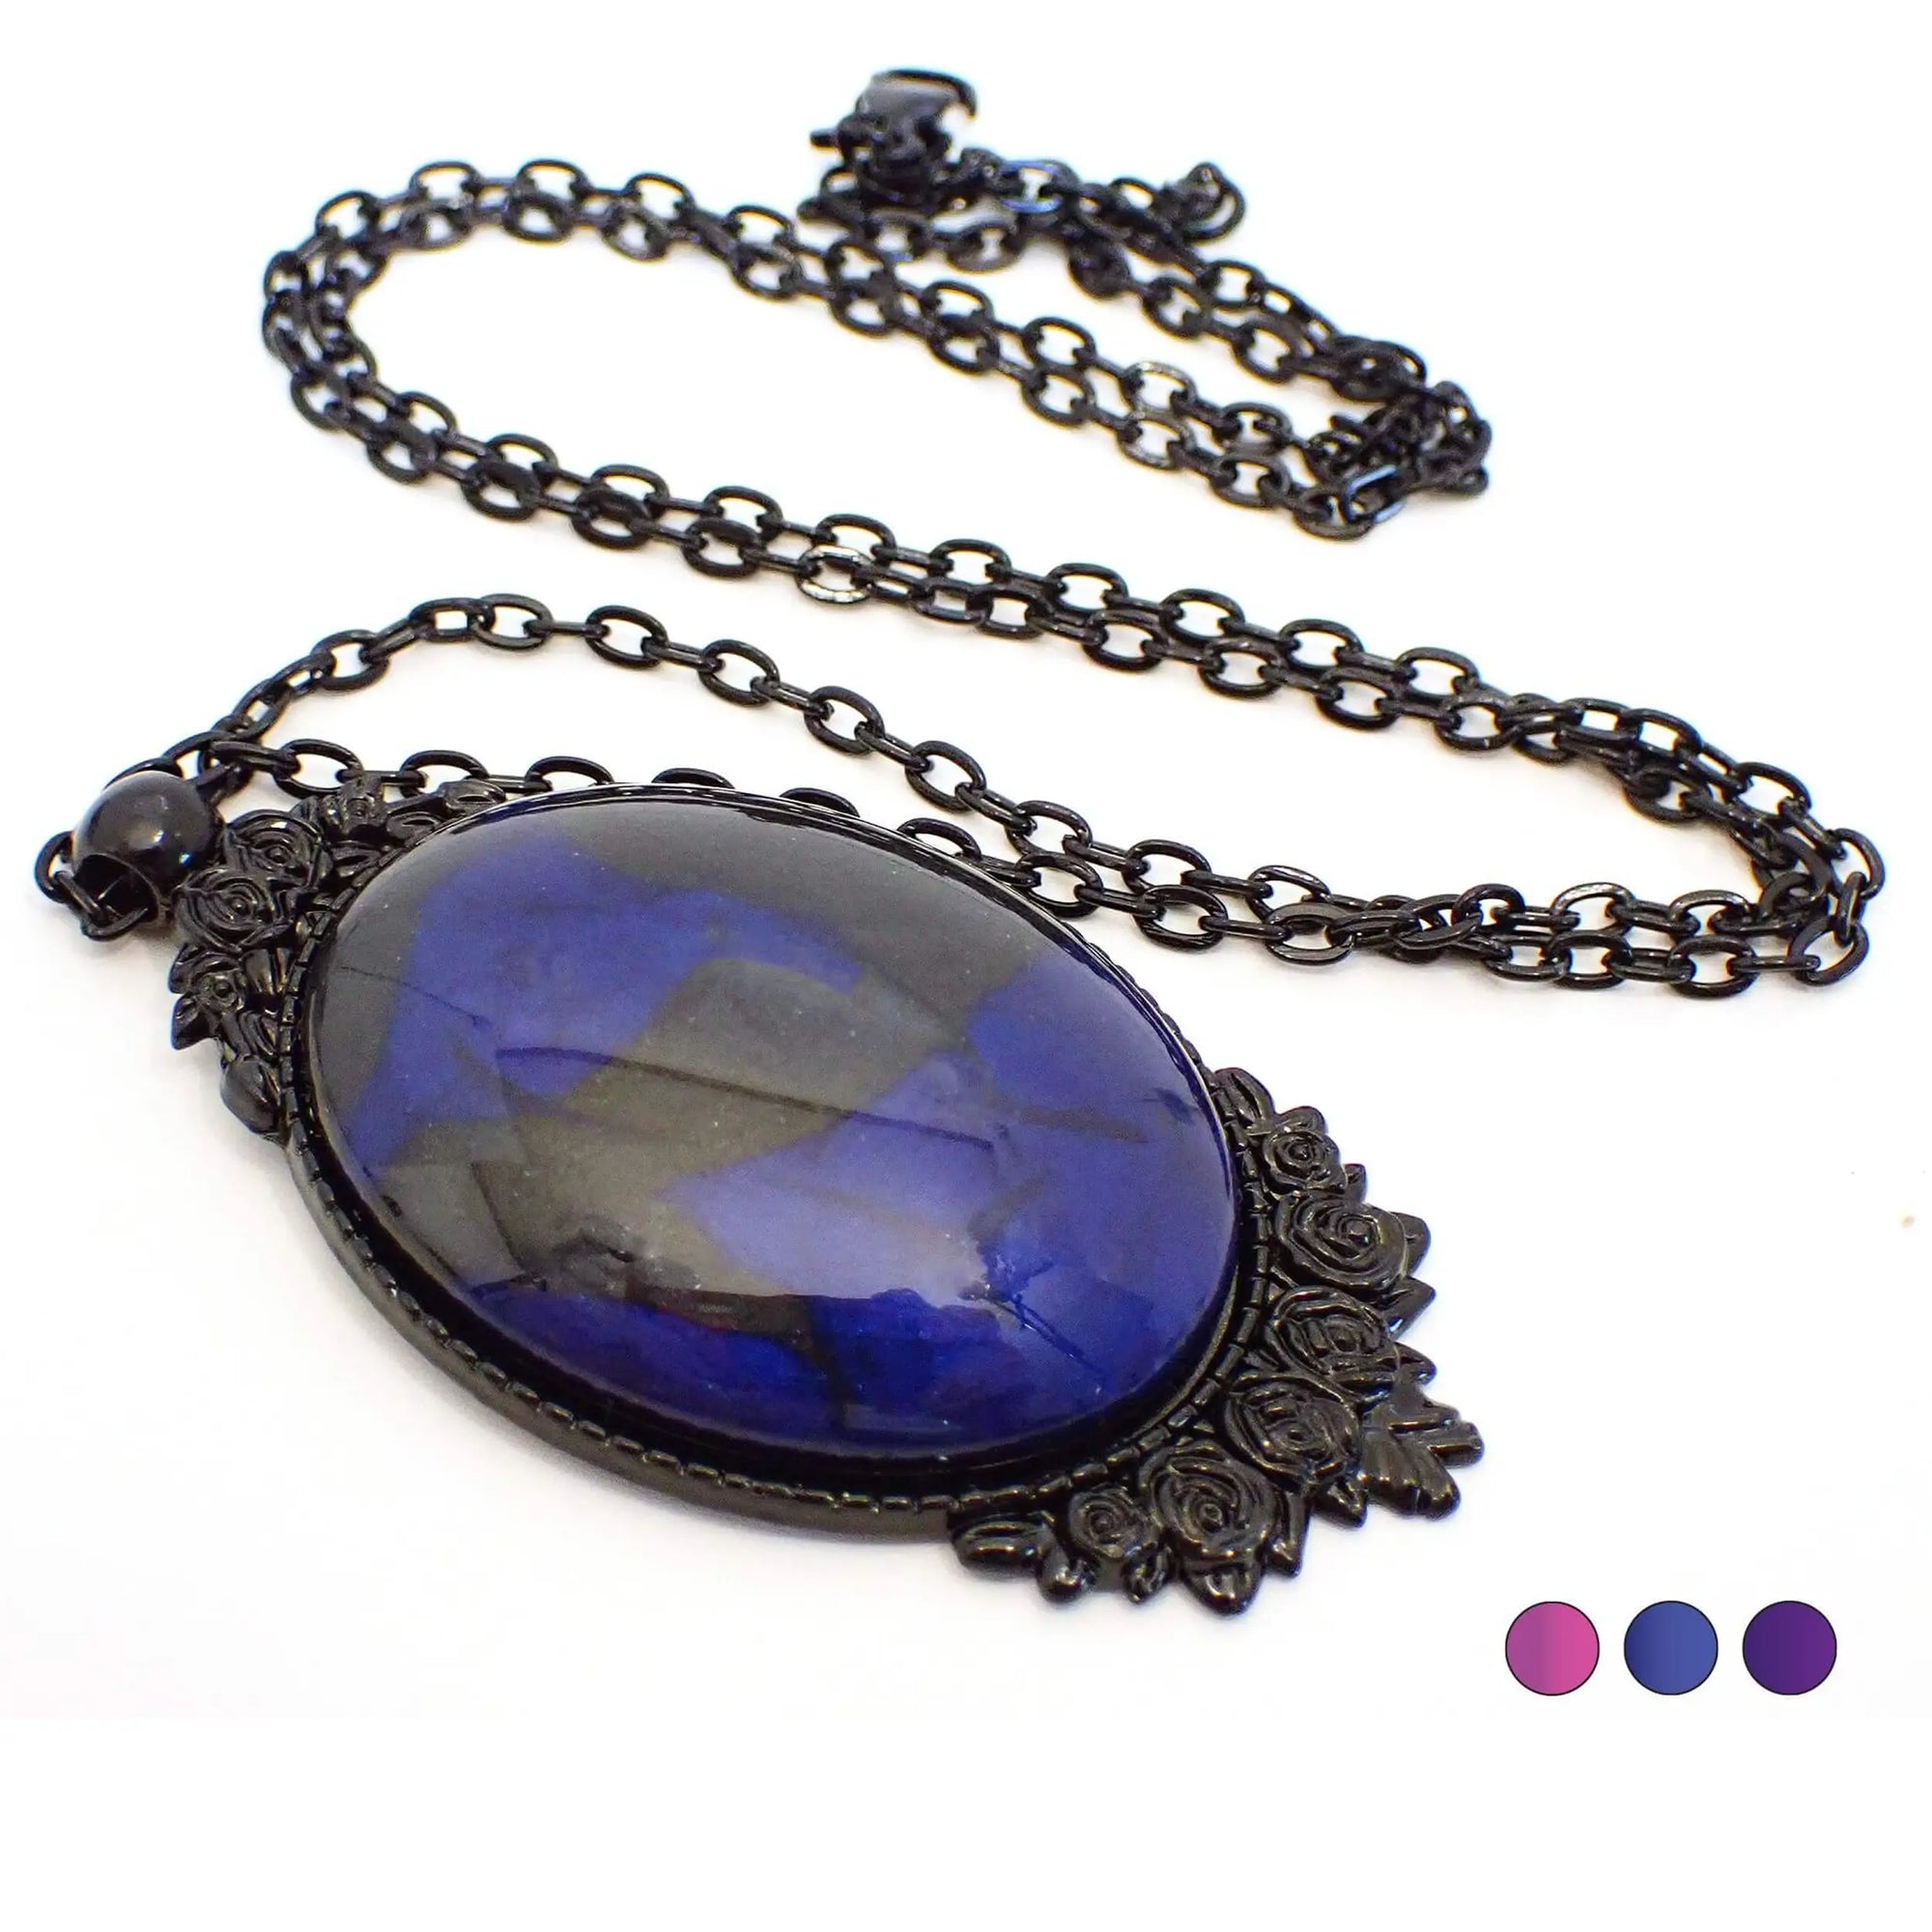 Top view of the handmade Goth Victorian style pendant necklace. The chain and setting are black coated metal. The chain has cable links and a lobster claw clasp at the end. The setting is oval shaped with a rose floral design on the top and bottom. The resin cab in the middle is oval and has pearly black and shades of pearly dark blue resin.